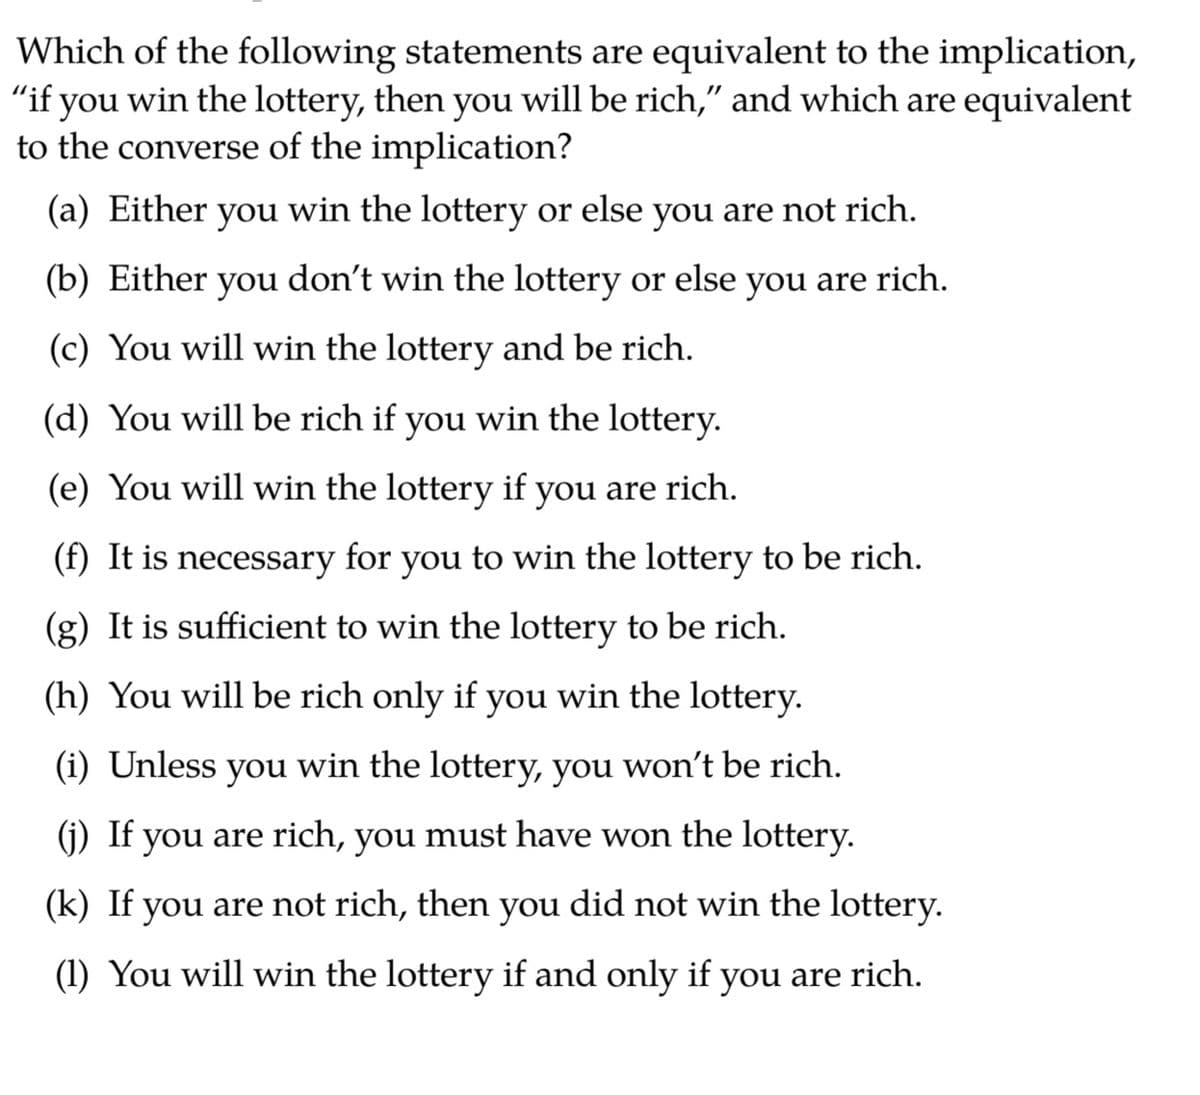 Which of the following statements are equivalent to the implication,
"if you win the lottery, then you will be rich," and which are equivalent
to the converse of the implication?
(a) Either you win the lottery or else you are not rich.
(b) Either you don't win the lottery or else you are rich.
(c) You will win the lottery and be rich.
(d) You will be rich if you win the lottery.
(e) You will win the lottery if you are rich.
(f) It is necessary for you to win the lottery to be rich.
(g) It is sufficient to win the lottery to be rich.
(h) You will be rich only if you win the lottery.
(i) Unless you win the lottery, you won't be rich.
(j) If you are rich, you must have won the lottery.
(k) If you are not rich, then you did not win the lottery.
(1) You will win the lottery if and only if you are rich.
